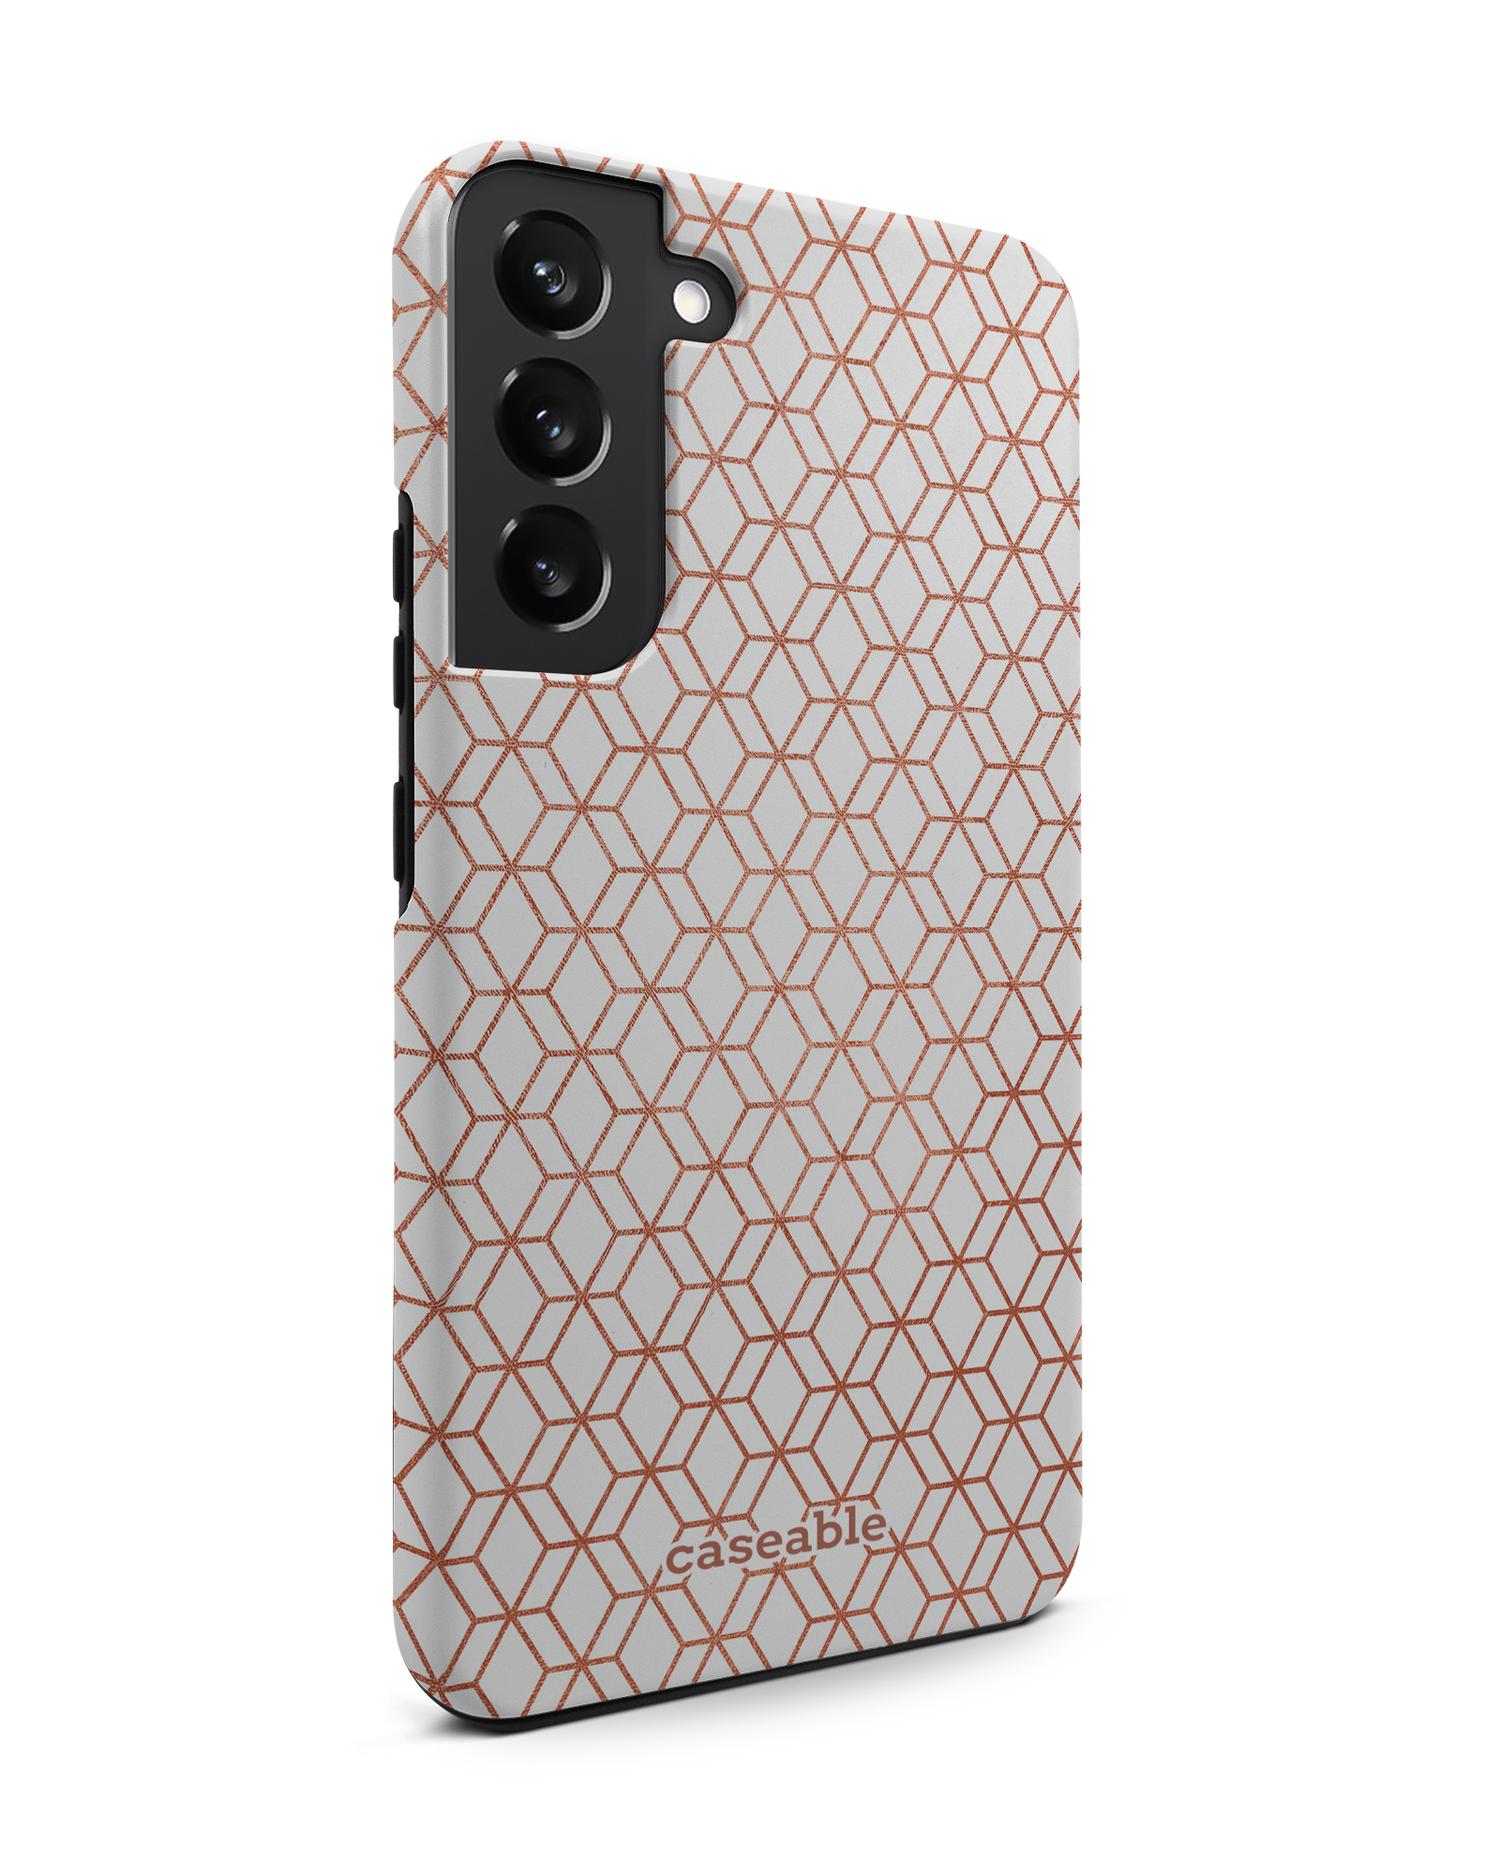 Morning Pattern Premium Phone Case Samsung Galaxy S22 Plus 5G: View from the left side